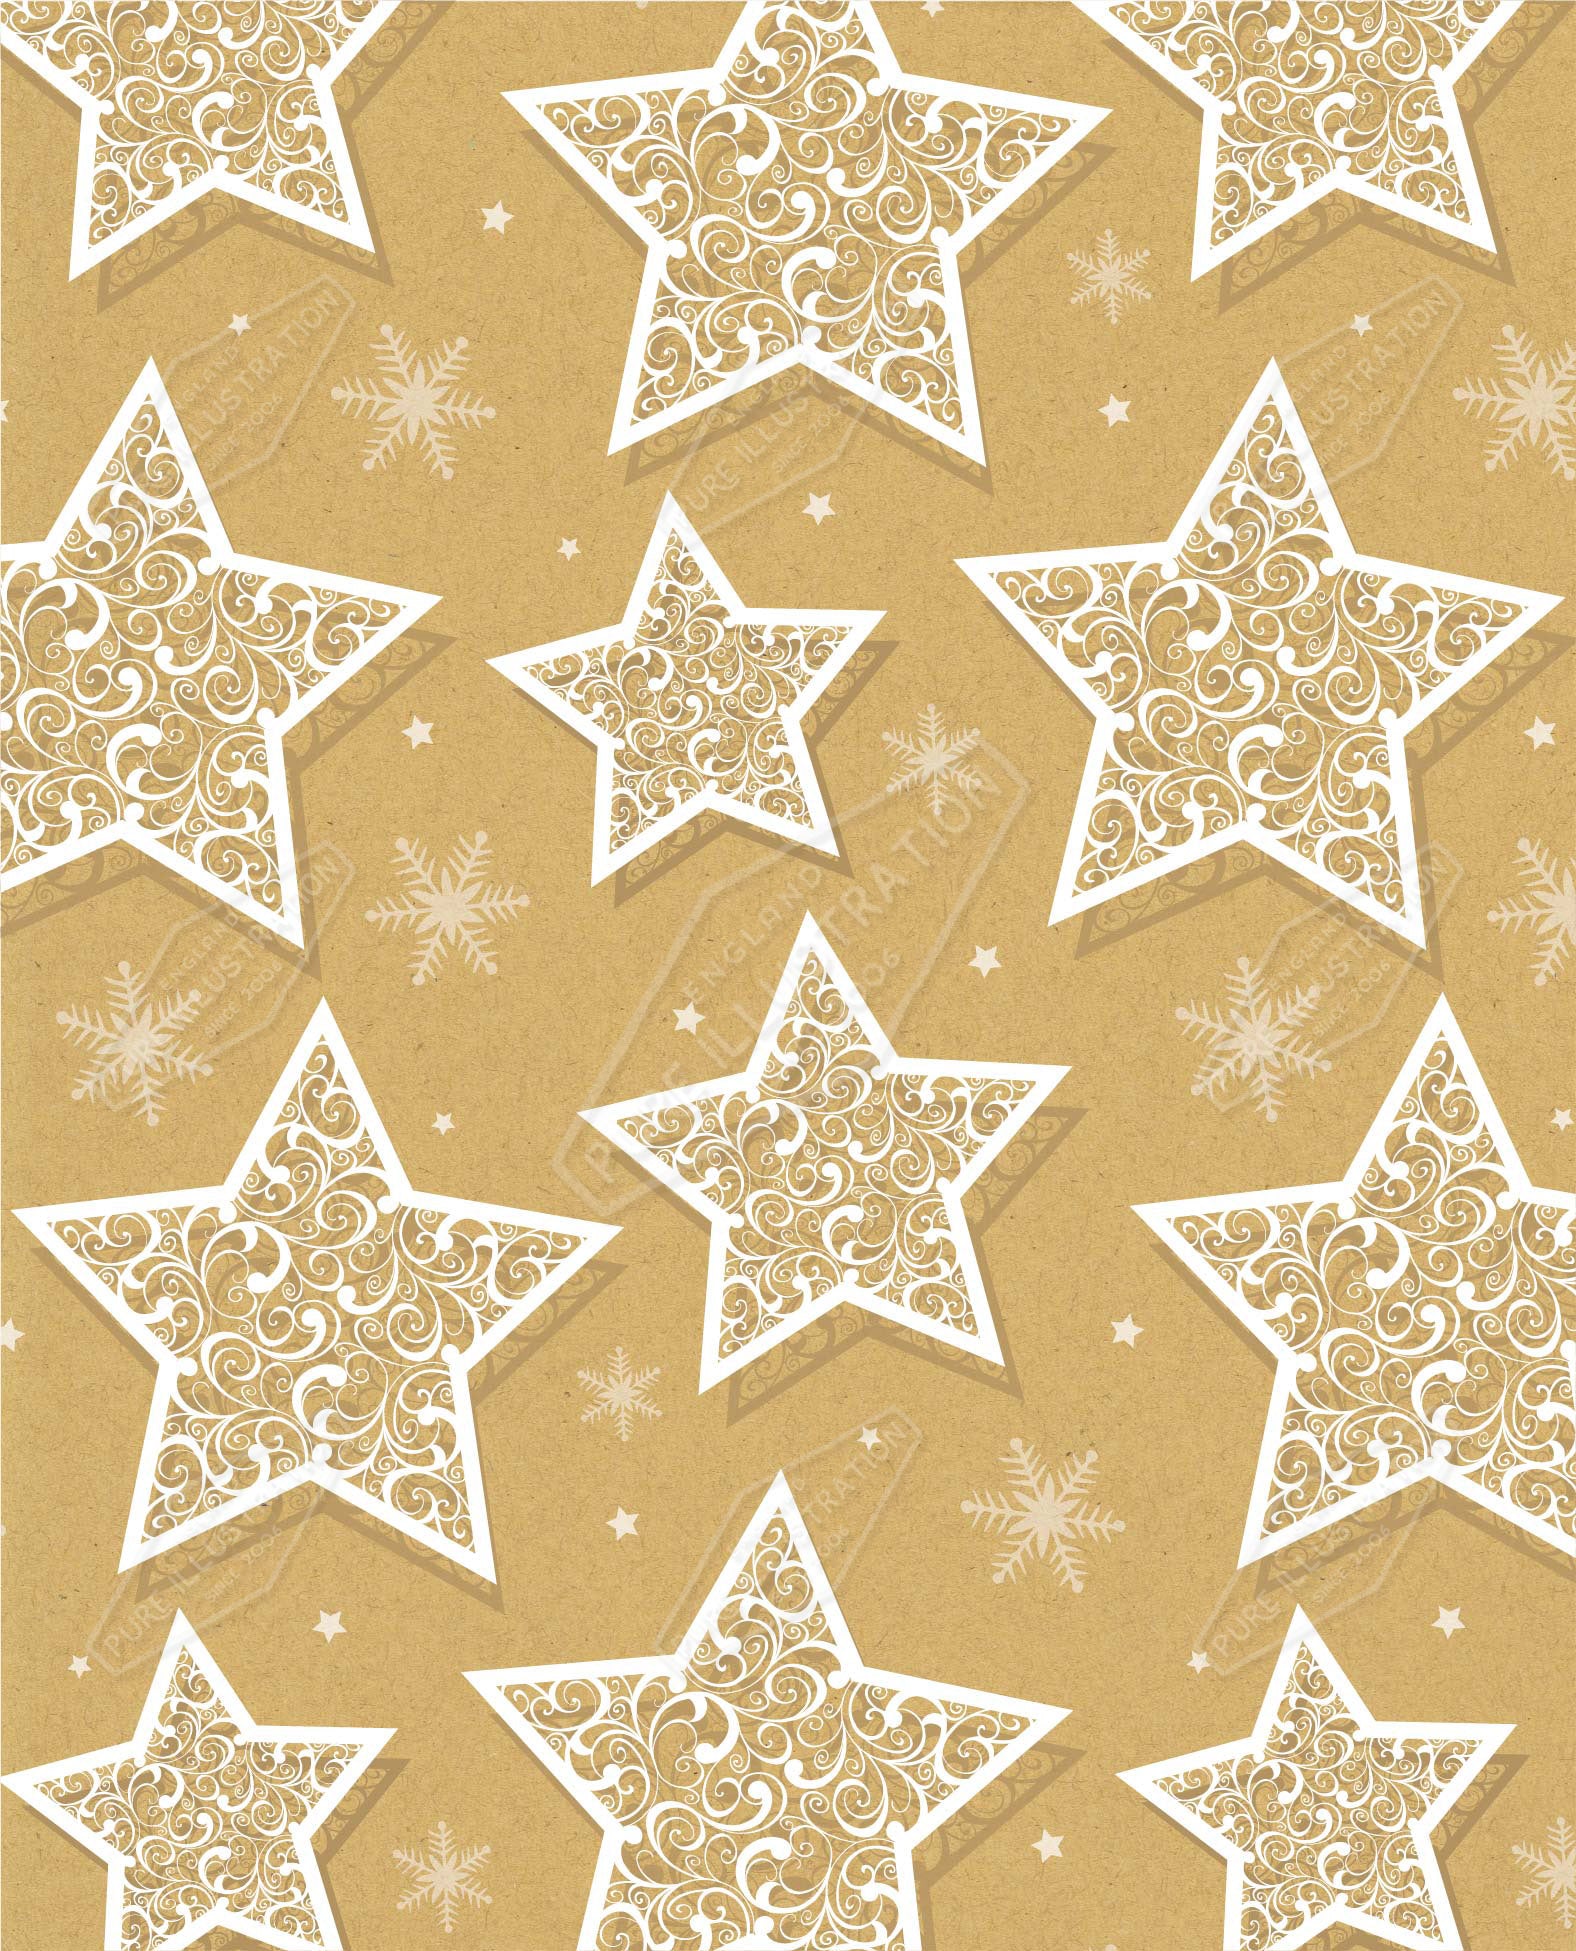 00035236SPI- Sarah Pitt is represented by Pure Art Licensing Agency - Christmas Pattern Design